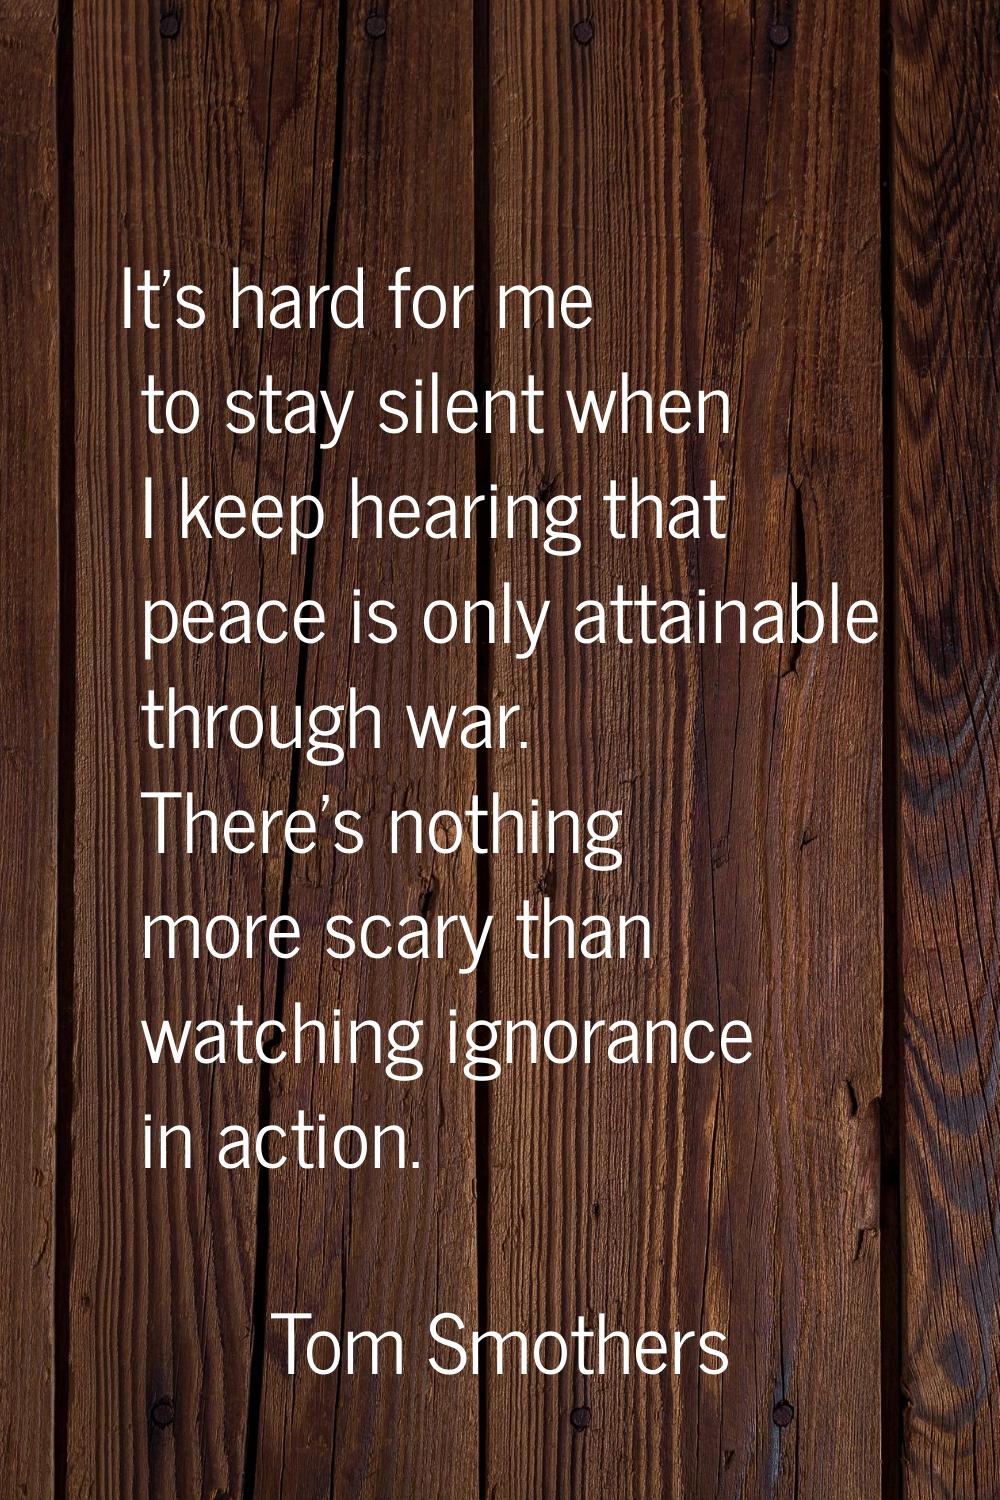 It's hard for me to stay silent when I keep hearing that peace is only attainable through war. Ther